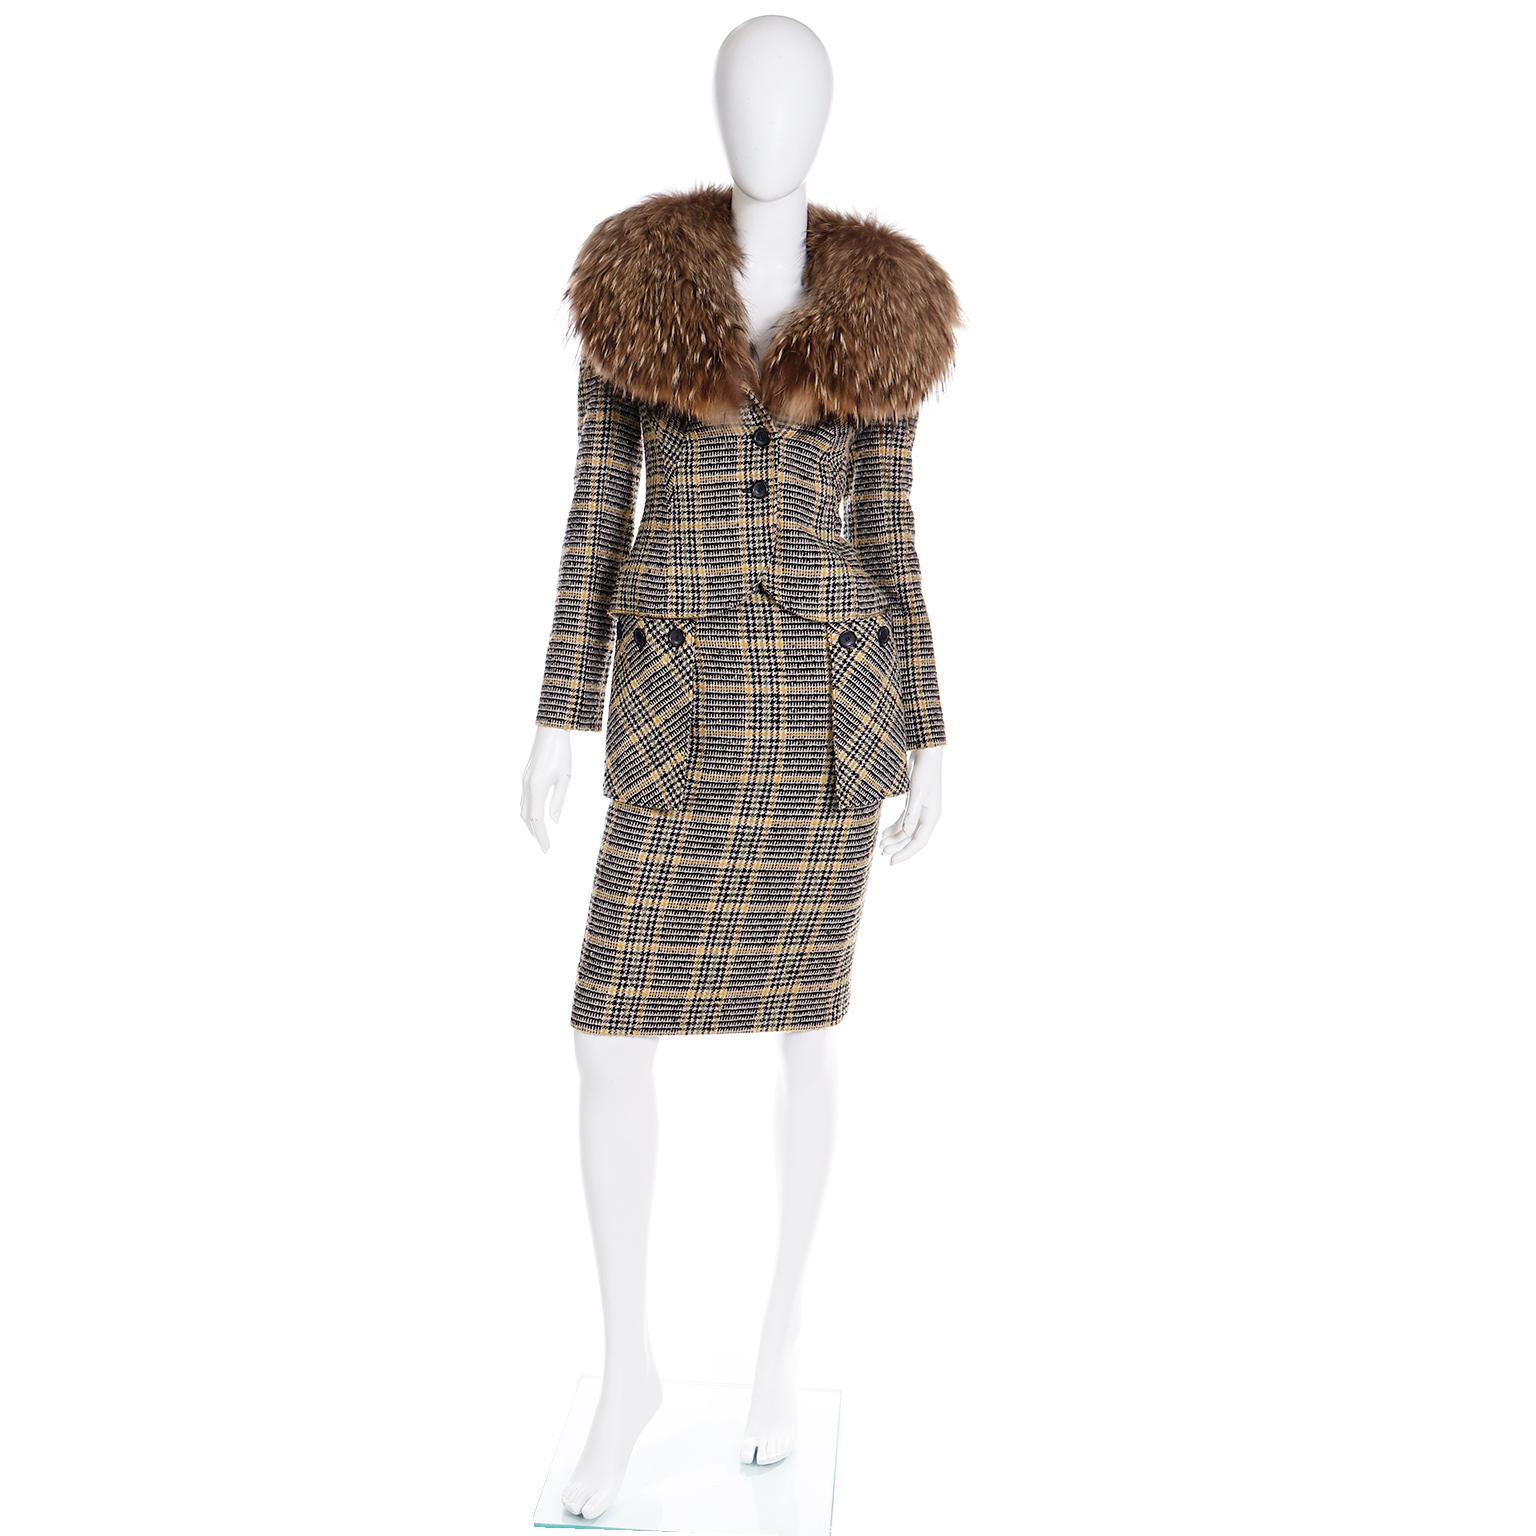 Valentino 2004 Runway Navy Blue Plaid Wool Skirt & Jacket Suit With Fox Fur In Excellent Condition For Sale In Portland, OR